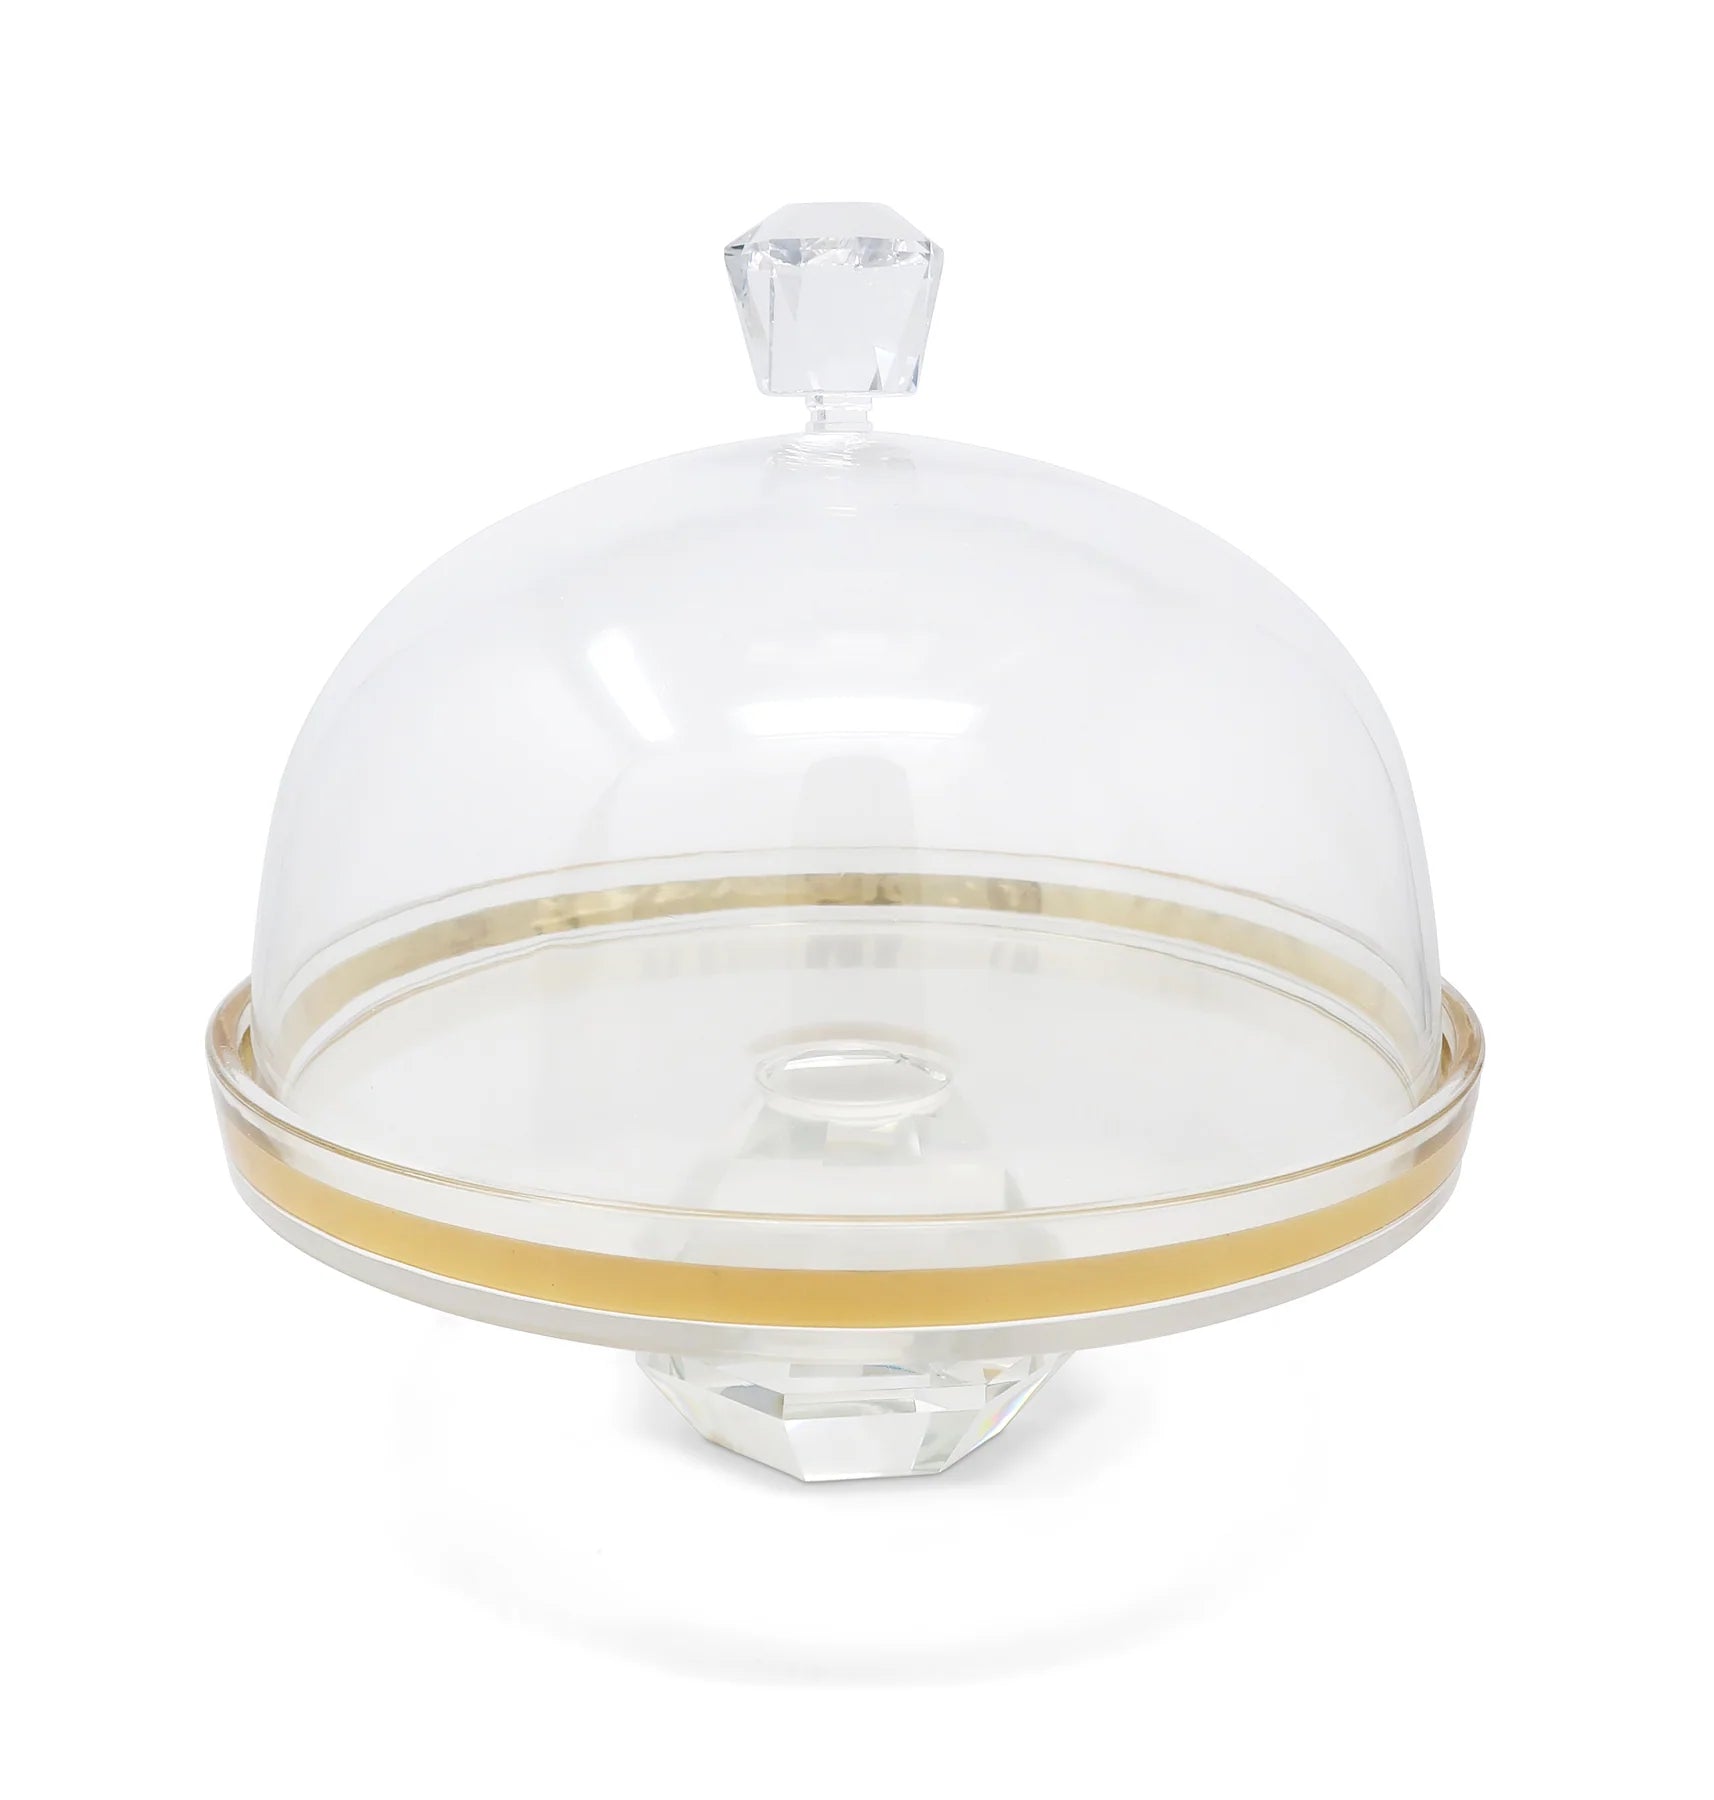 Glass Cake Dome Gold Design with Diamond Shaped Base and Handle